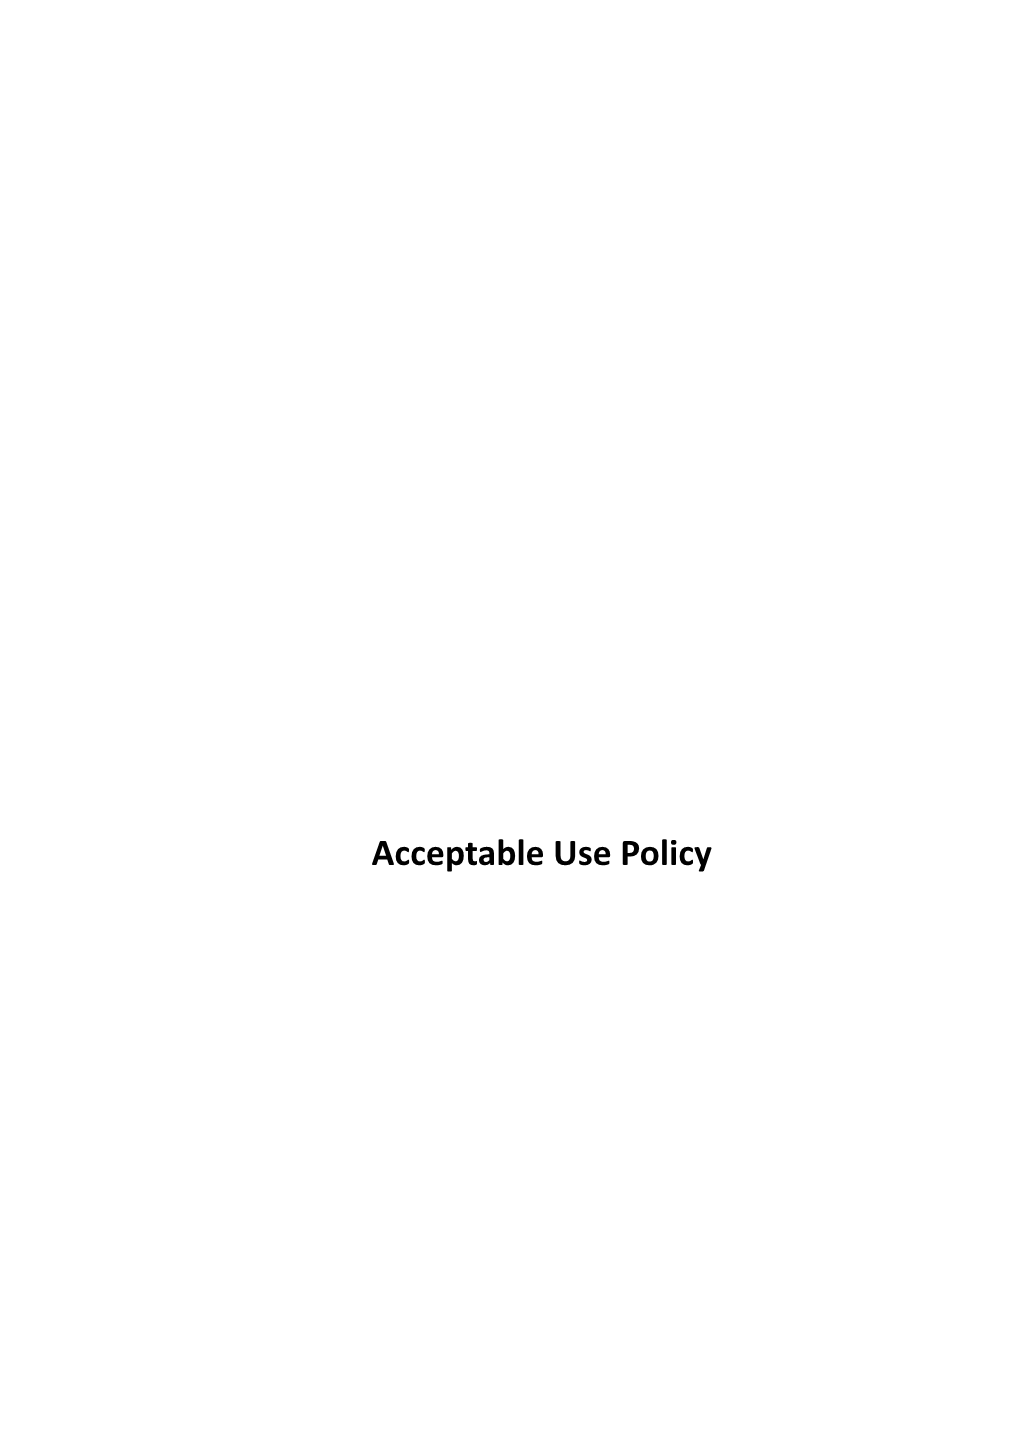 Acceptable Usage Policy for Internet Use